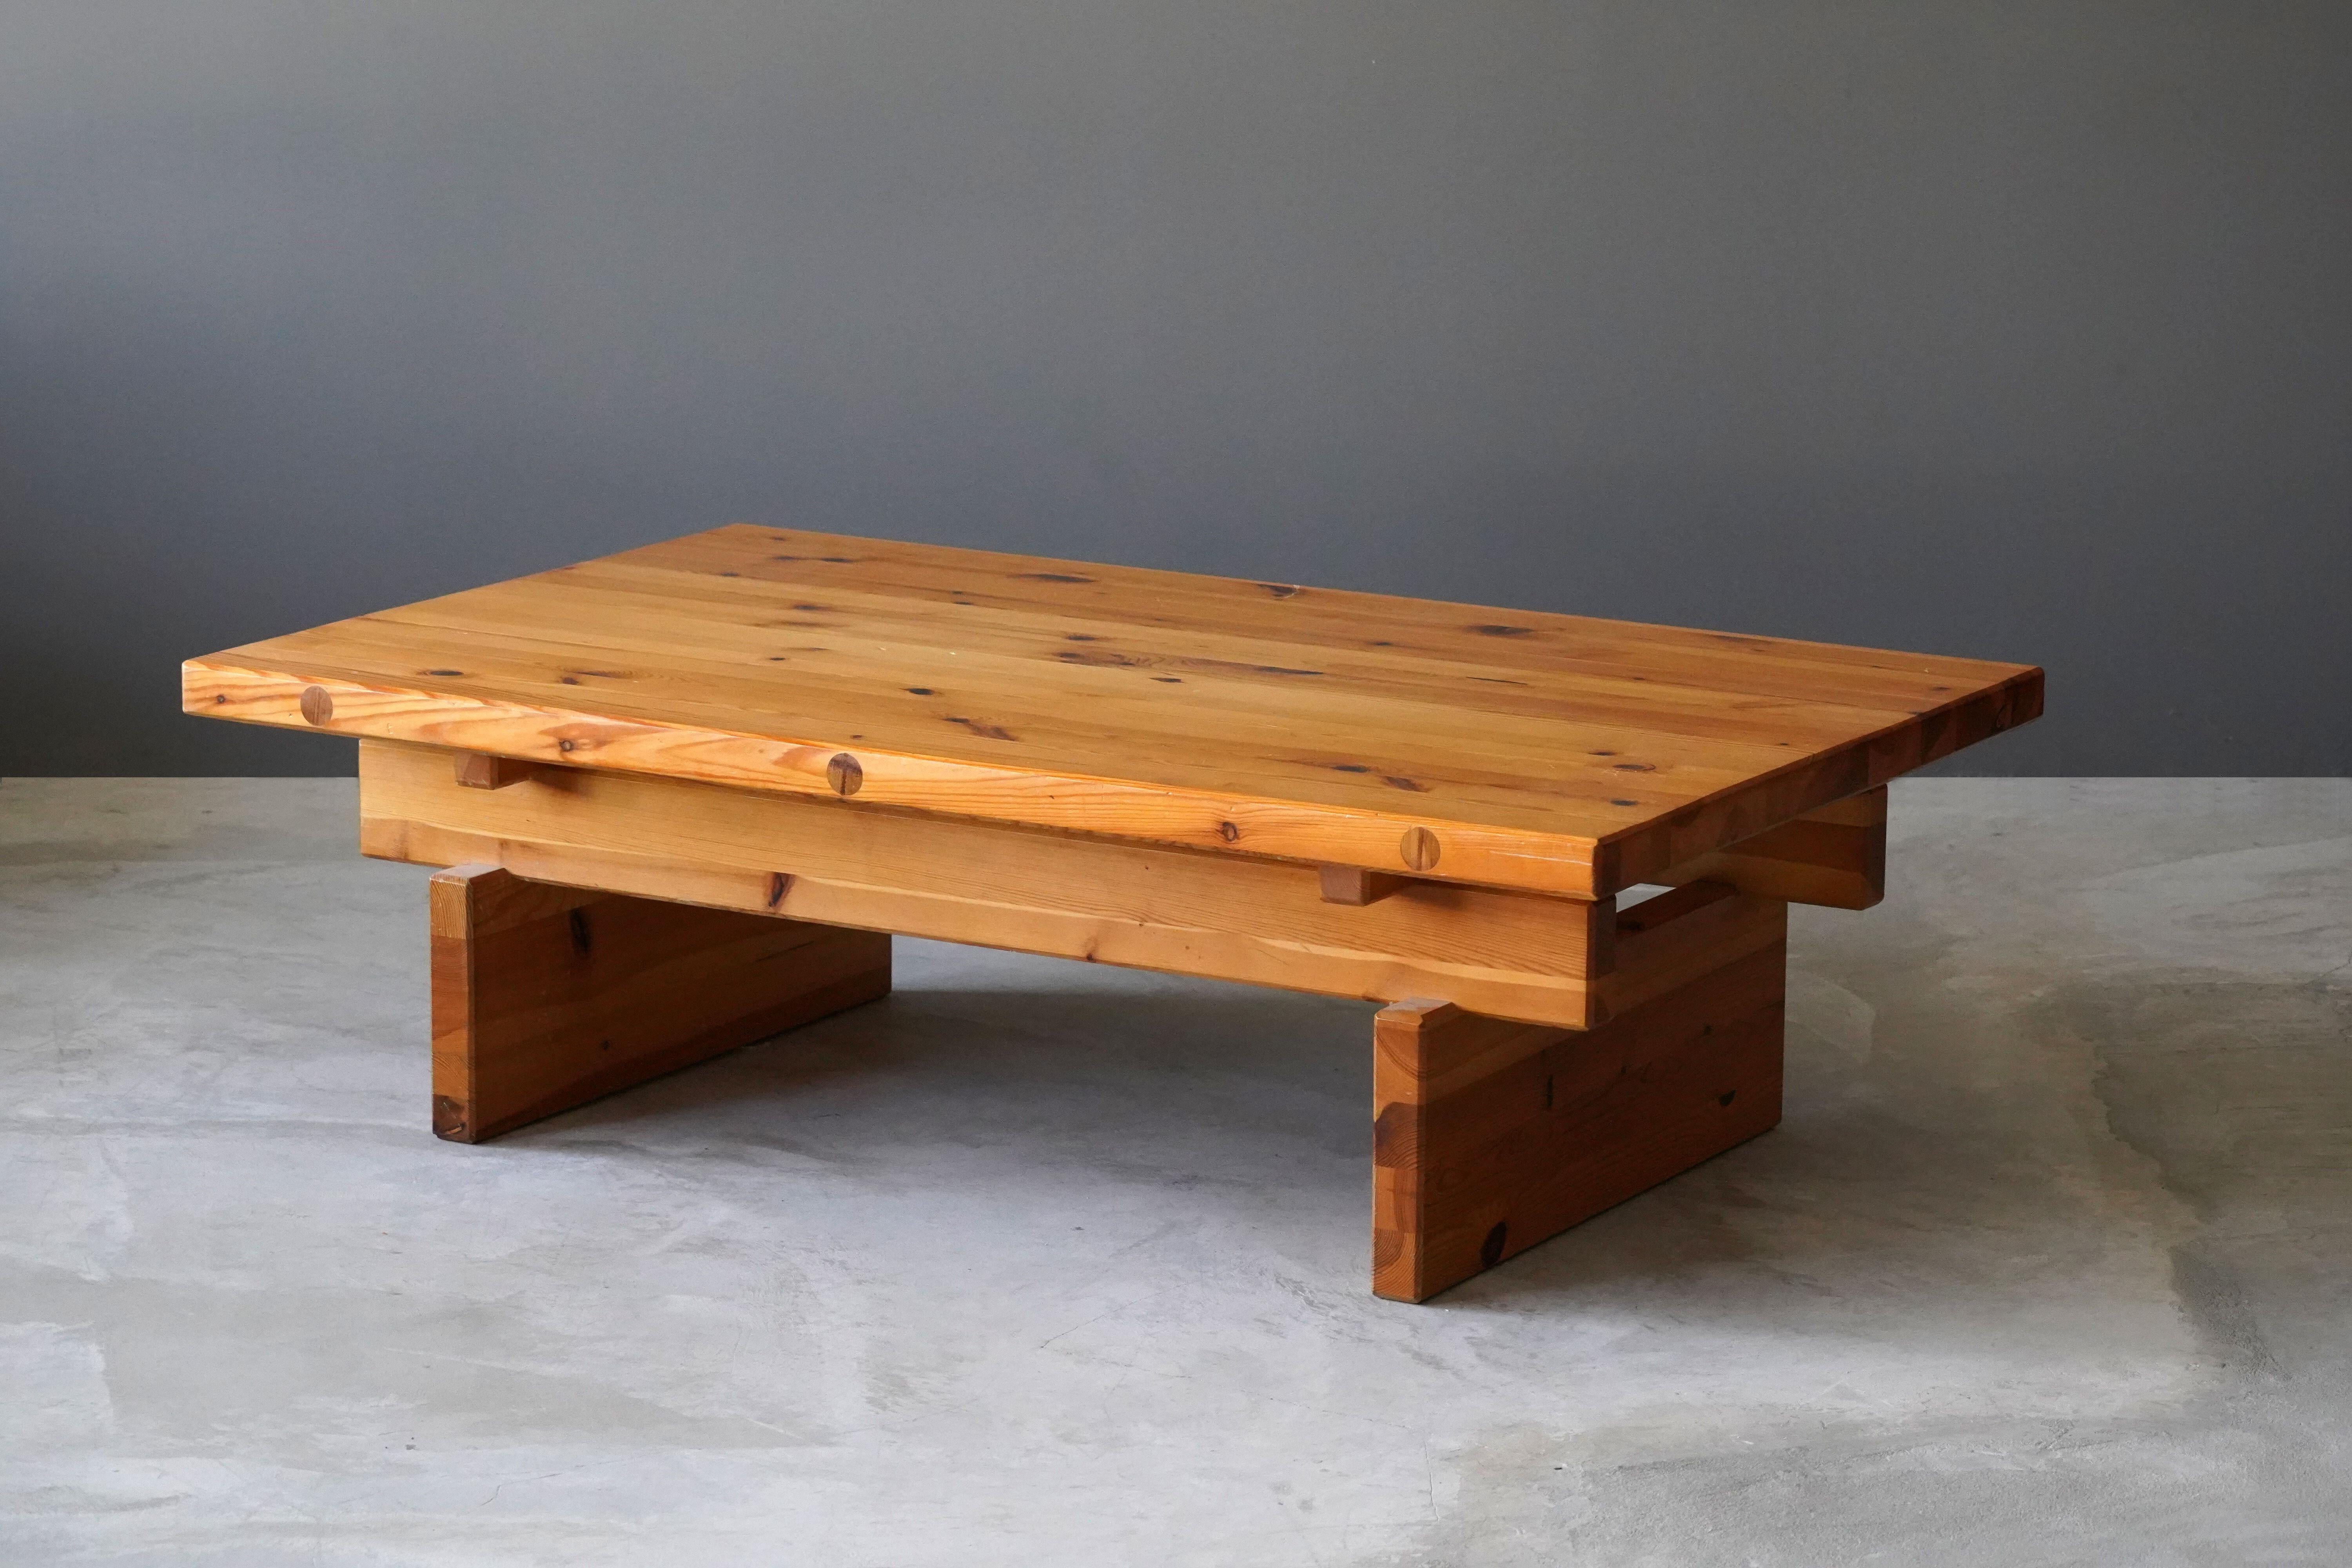 A coffee table or bench, designed by Roland Wilhelmsson, produced by Timmermannen, Sweden, 1970s

This highly functionalist piece is produced using what Wilhelmsson referred to as the 